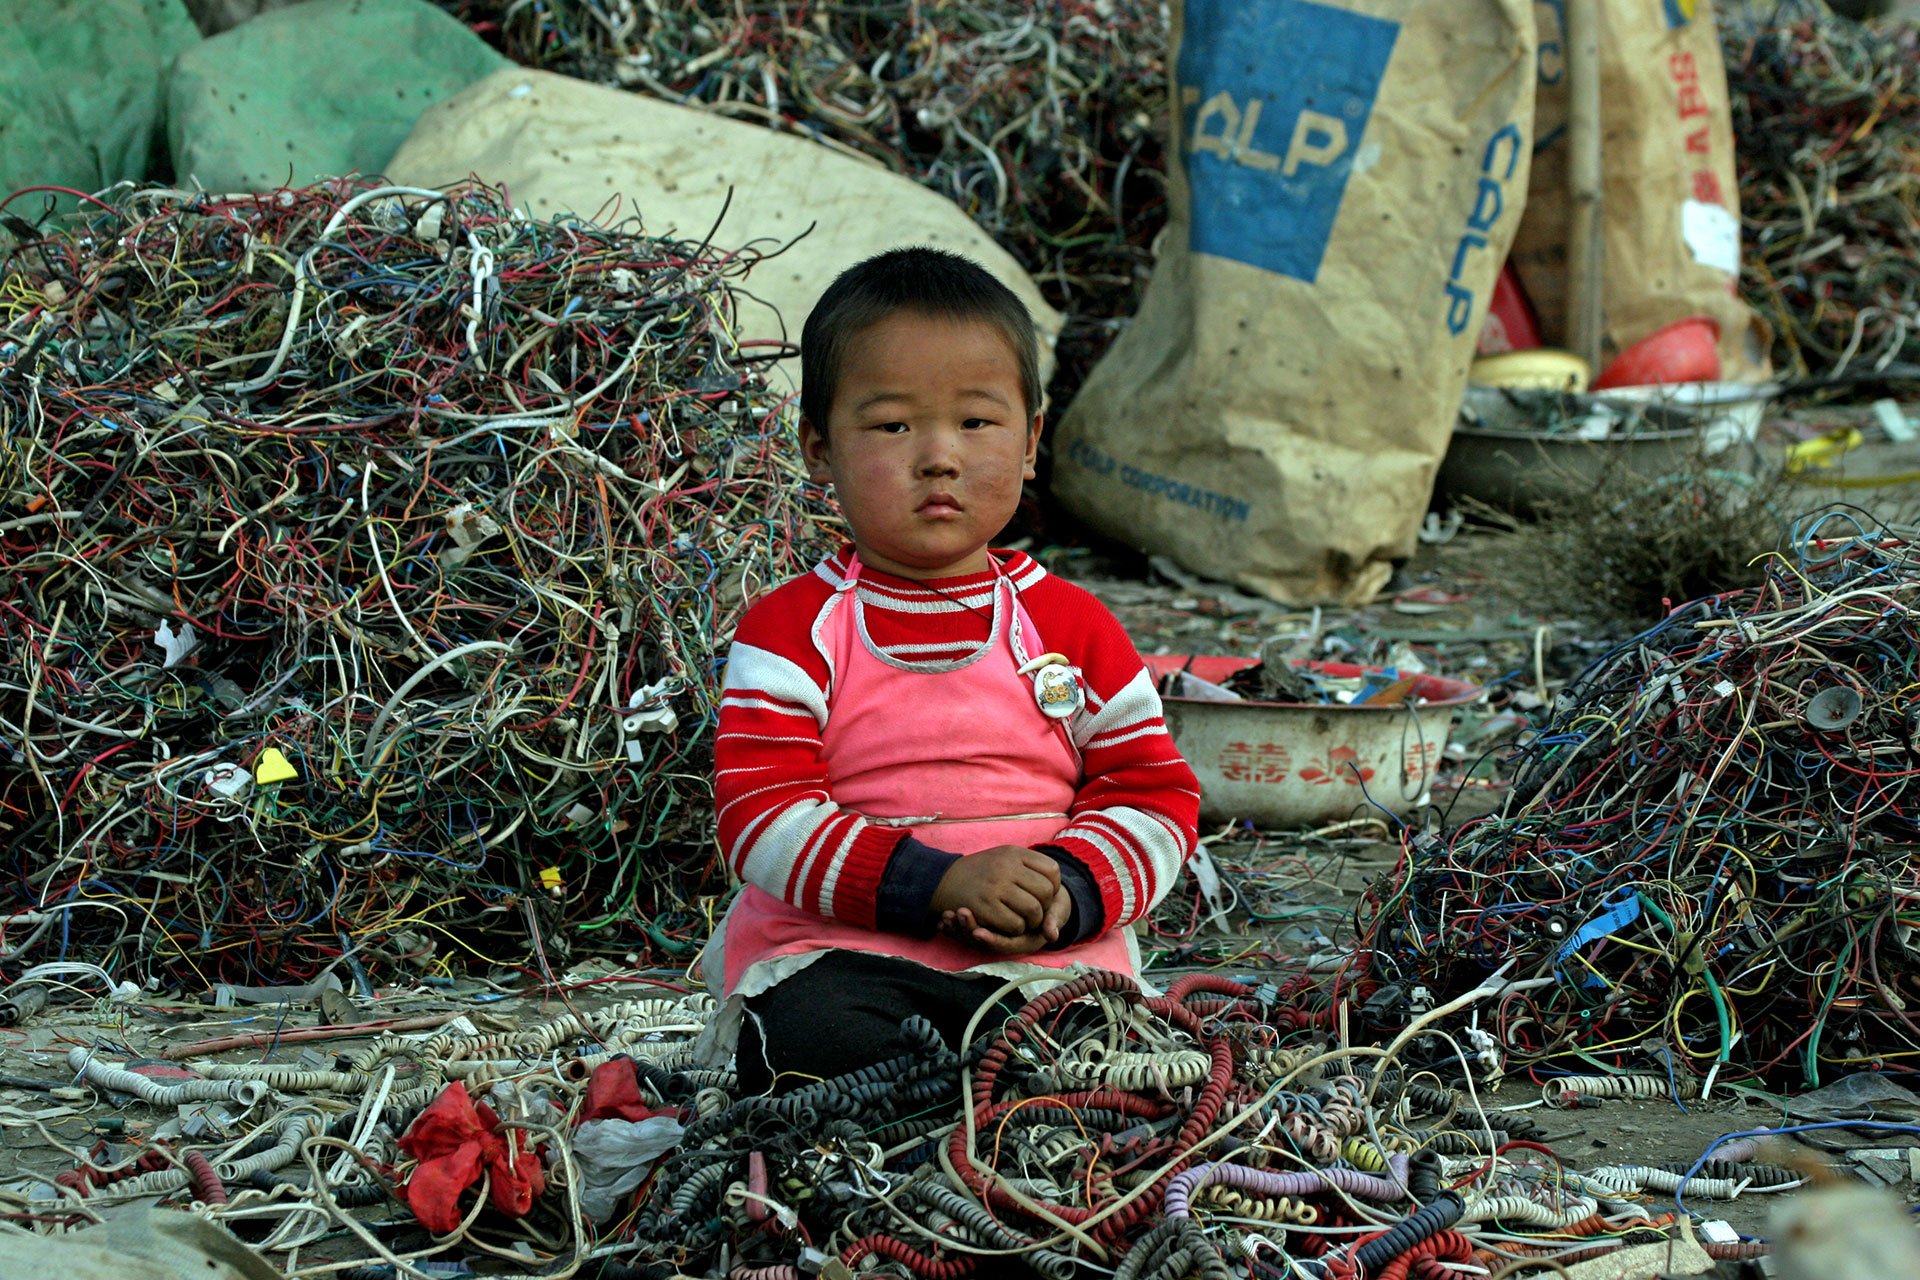 Toxics e-Waste Documentation in China © Greenpeace / Natalie Behring